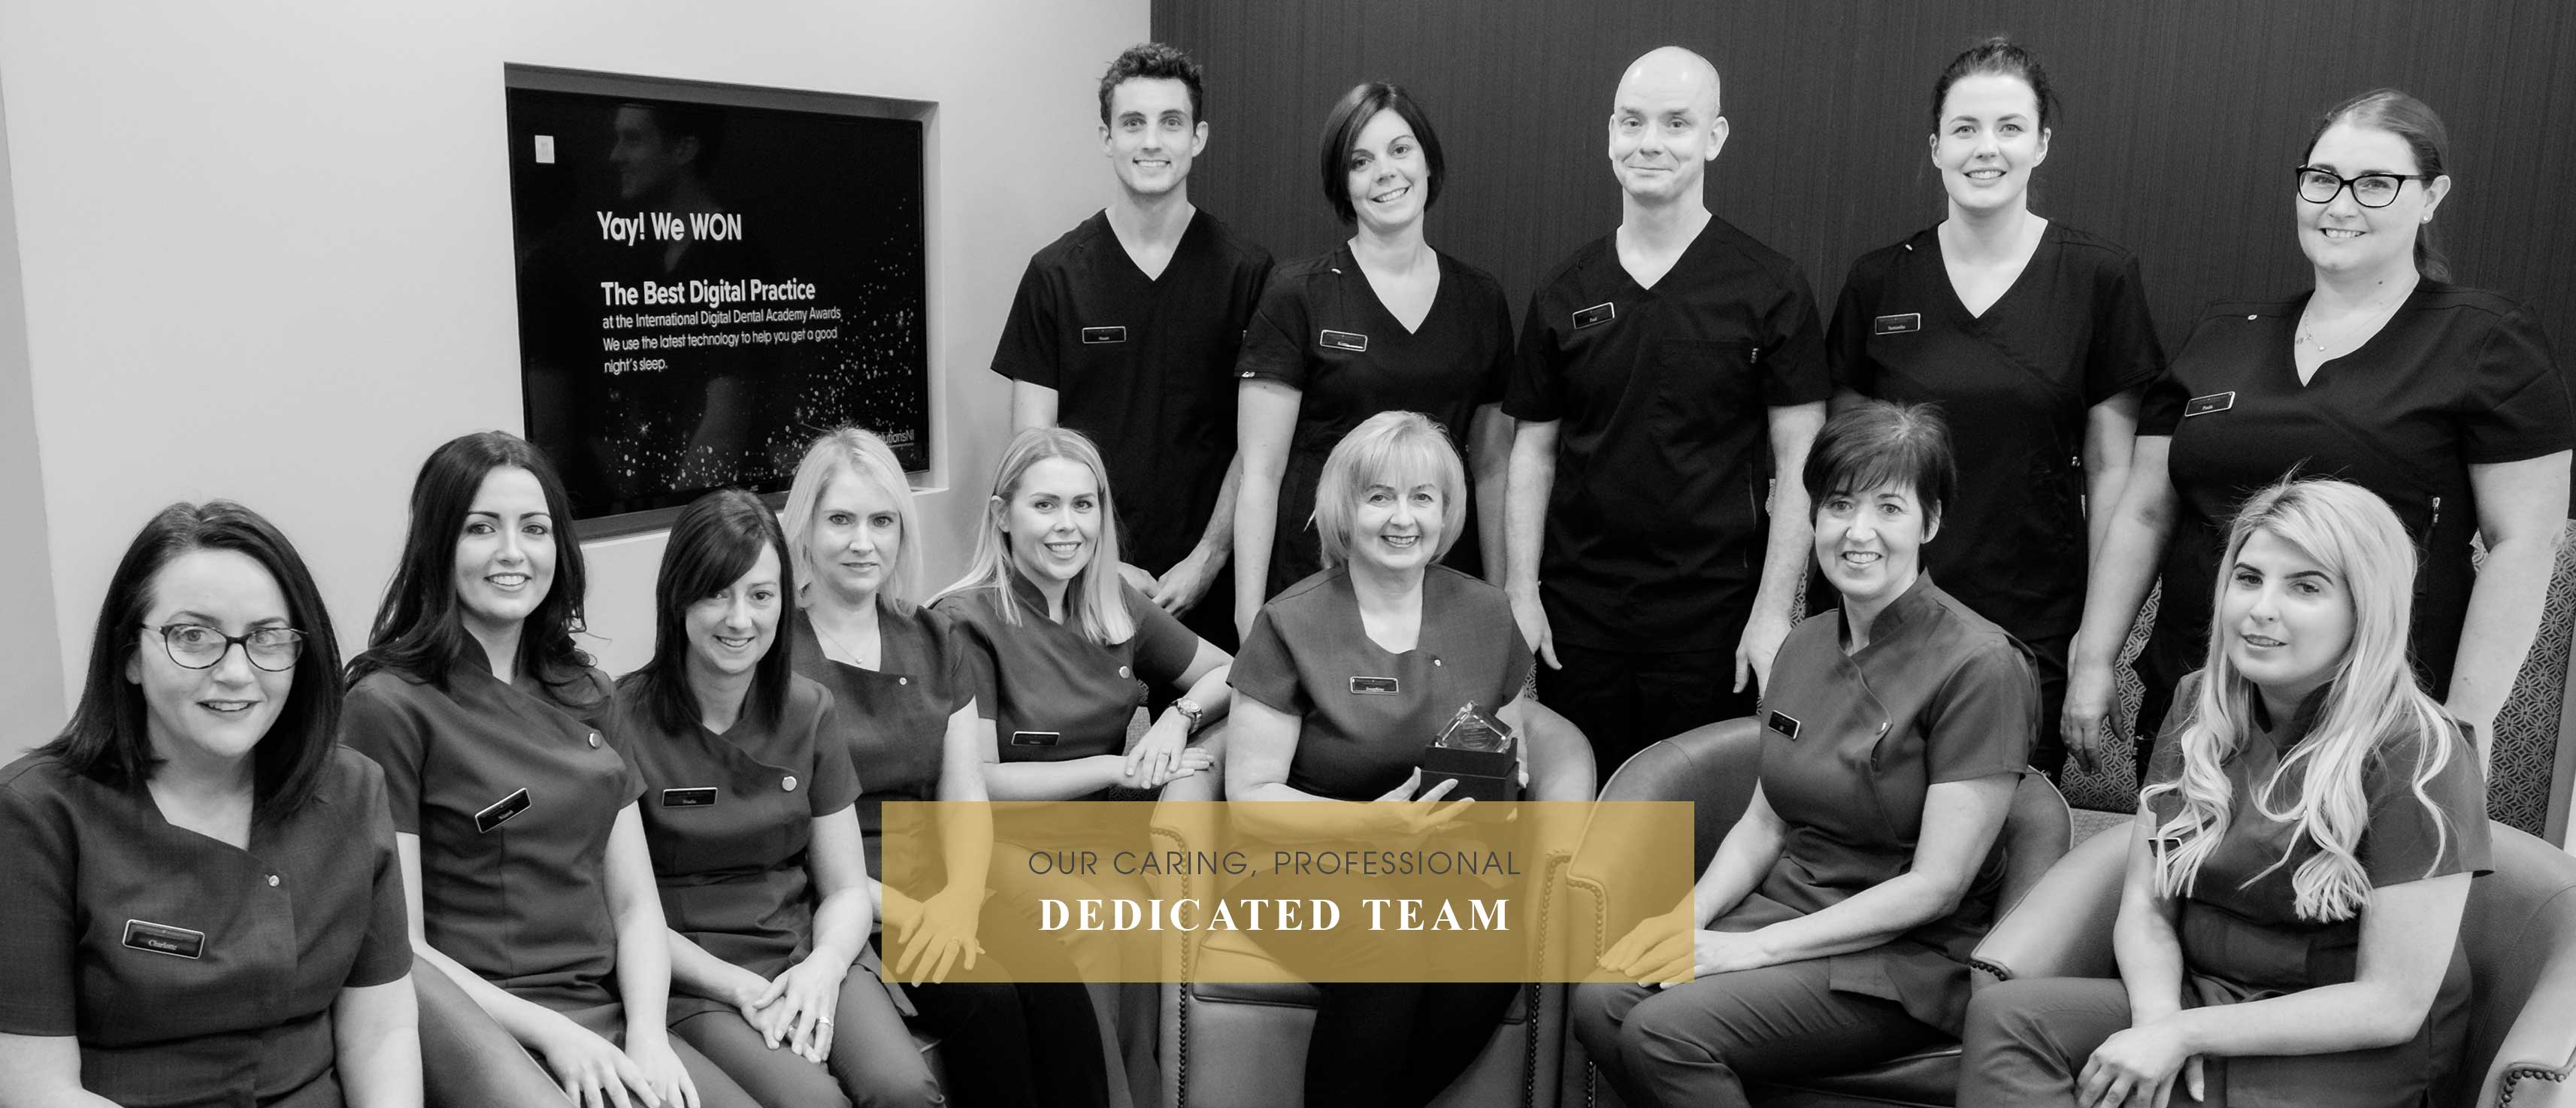 our caring, professional dedicated team